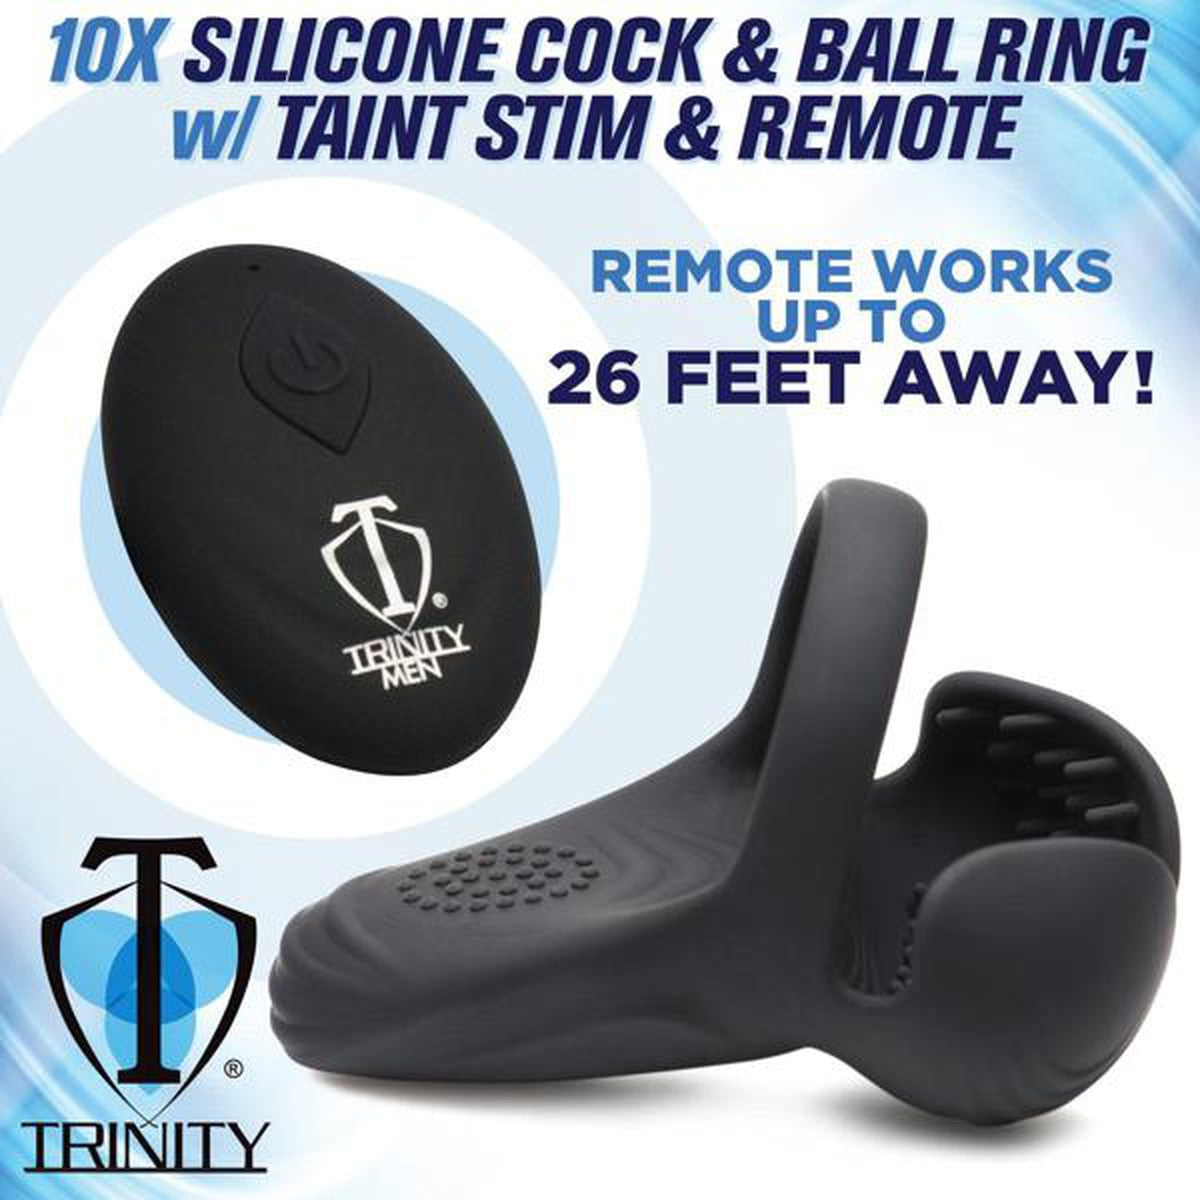 Trinity 10x Vibrating Silicone Cock Ring With Taint Stim